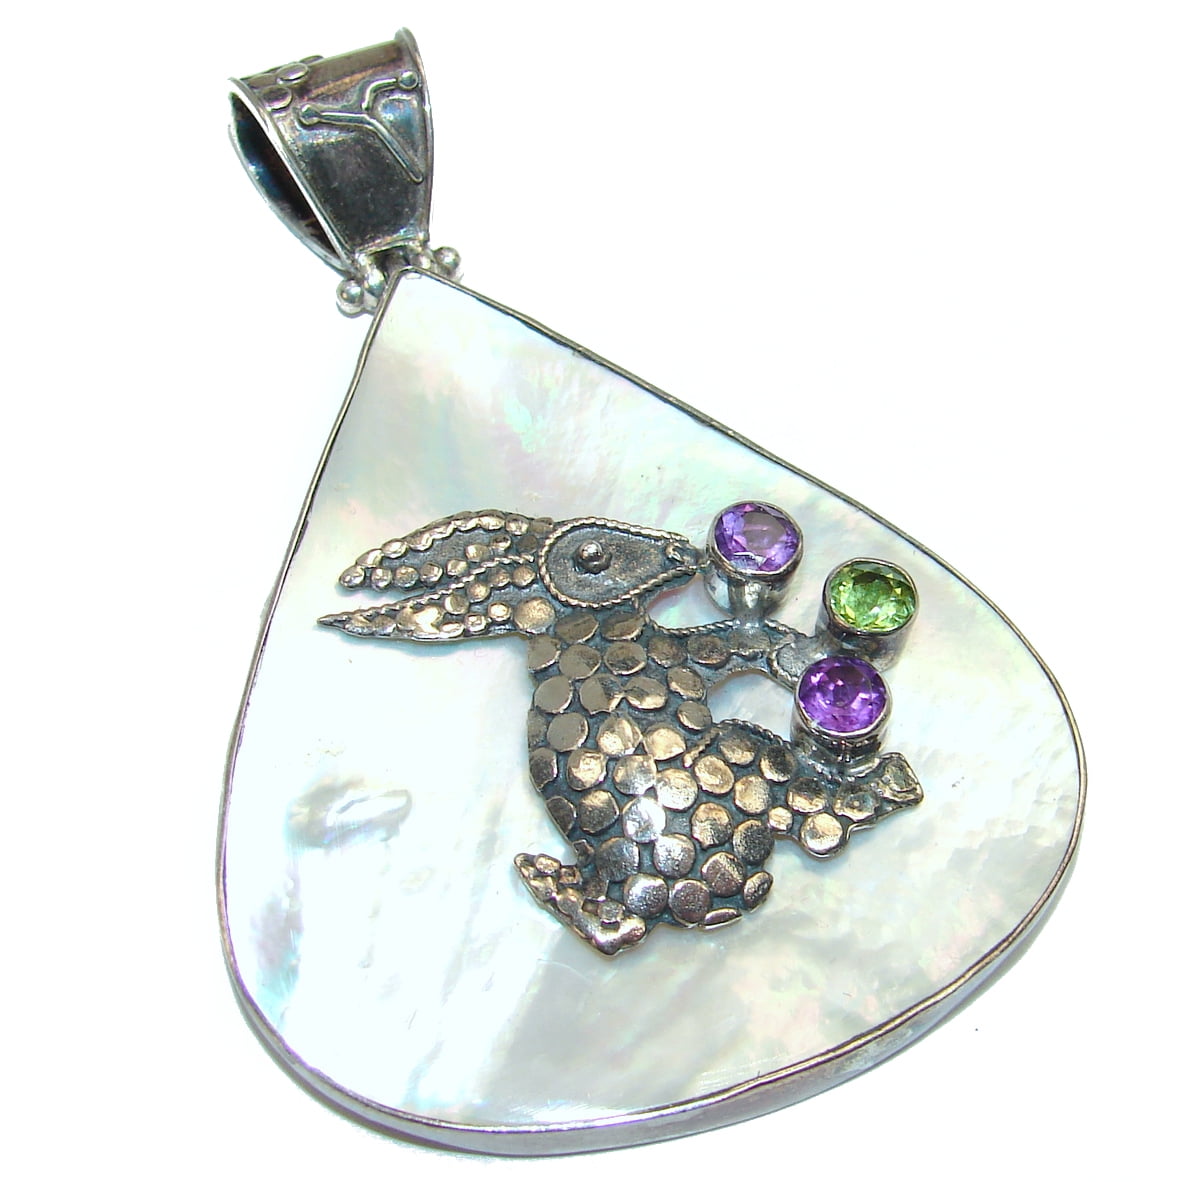 Blister Pearl Women 925 Sterling Silver Pendant FREE GIFT BOX